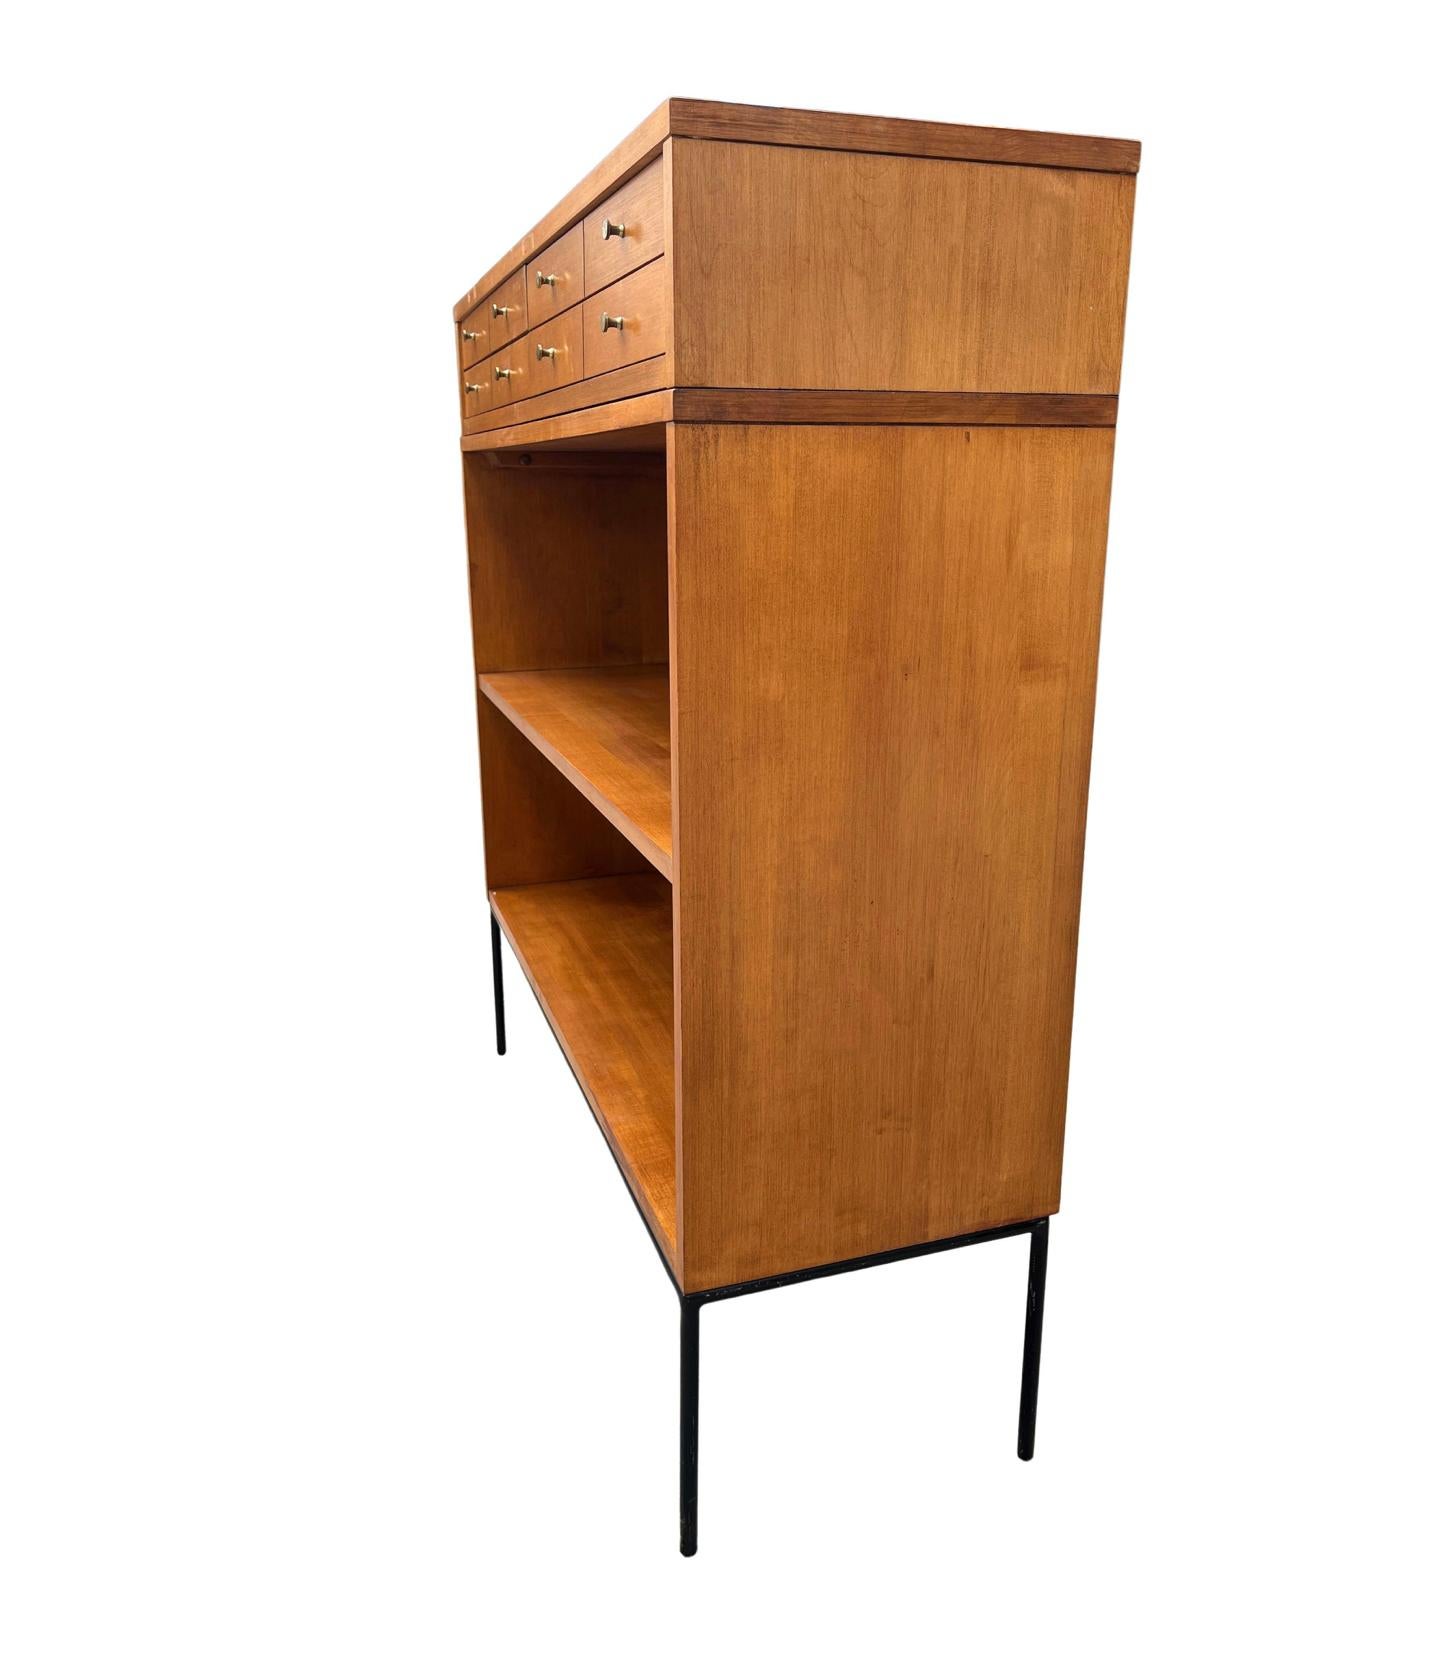 American Midcentury Paul McCobb Single Bookcase with Jewelry Cabinet